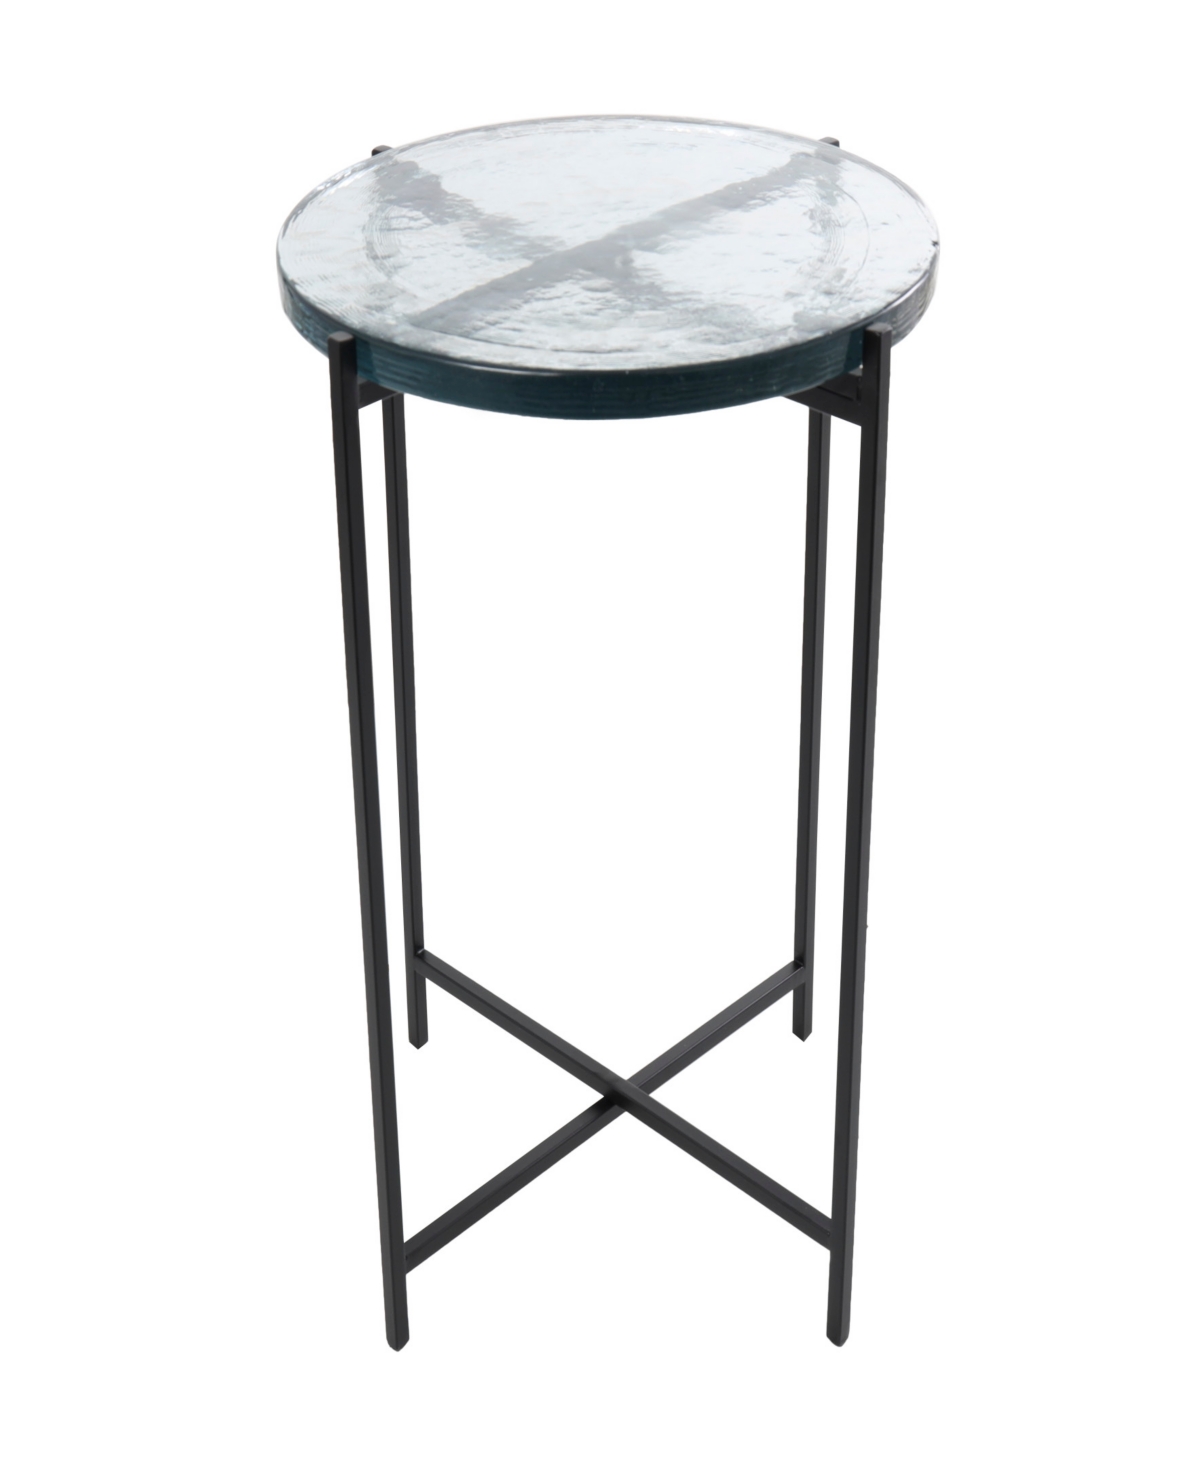 Rosemary Lane 24" Metal With Textured Glass Tabletop X-shaped Accent Table In Black